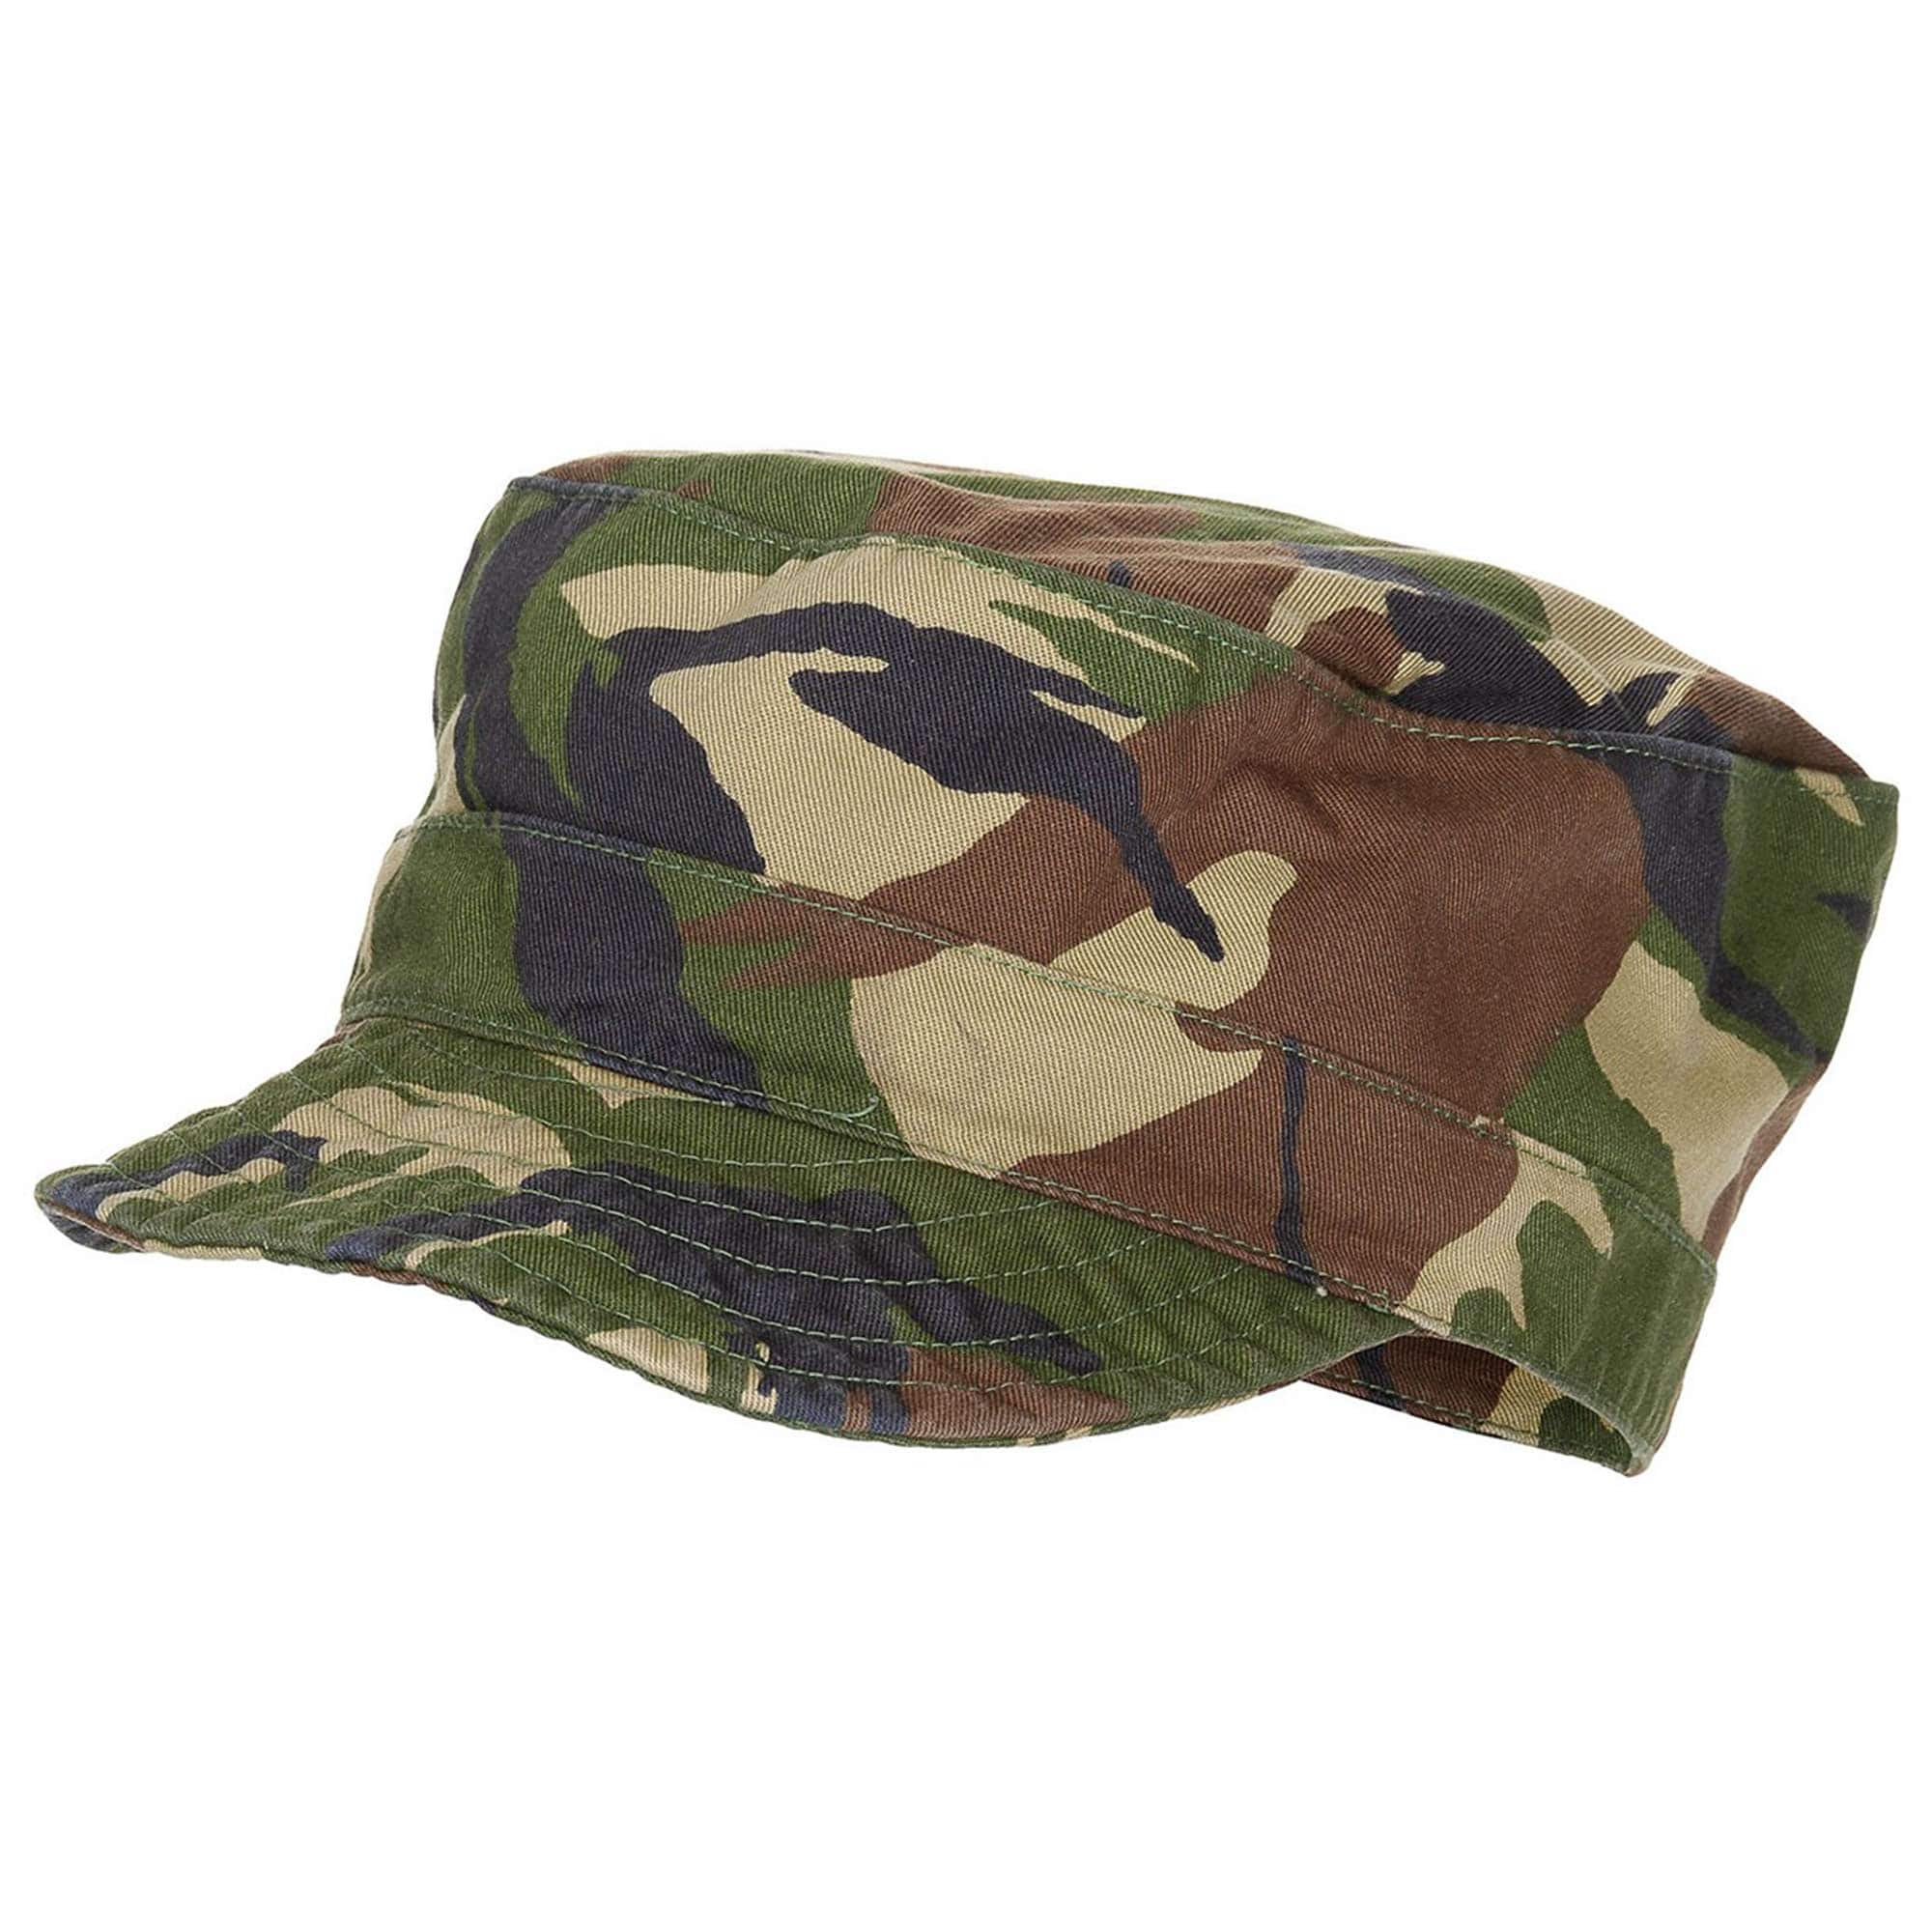 Purchase the Used Dutch Field Cap DPM Camouflage by ASMC